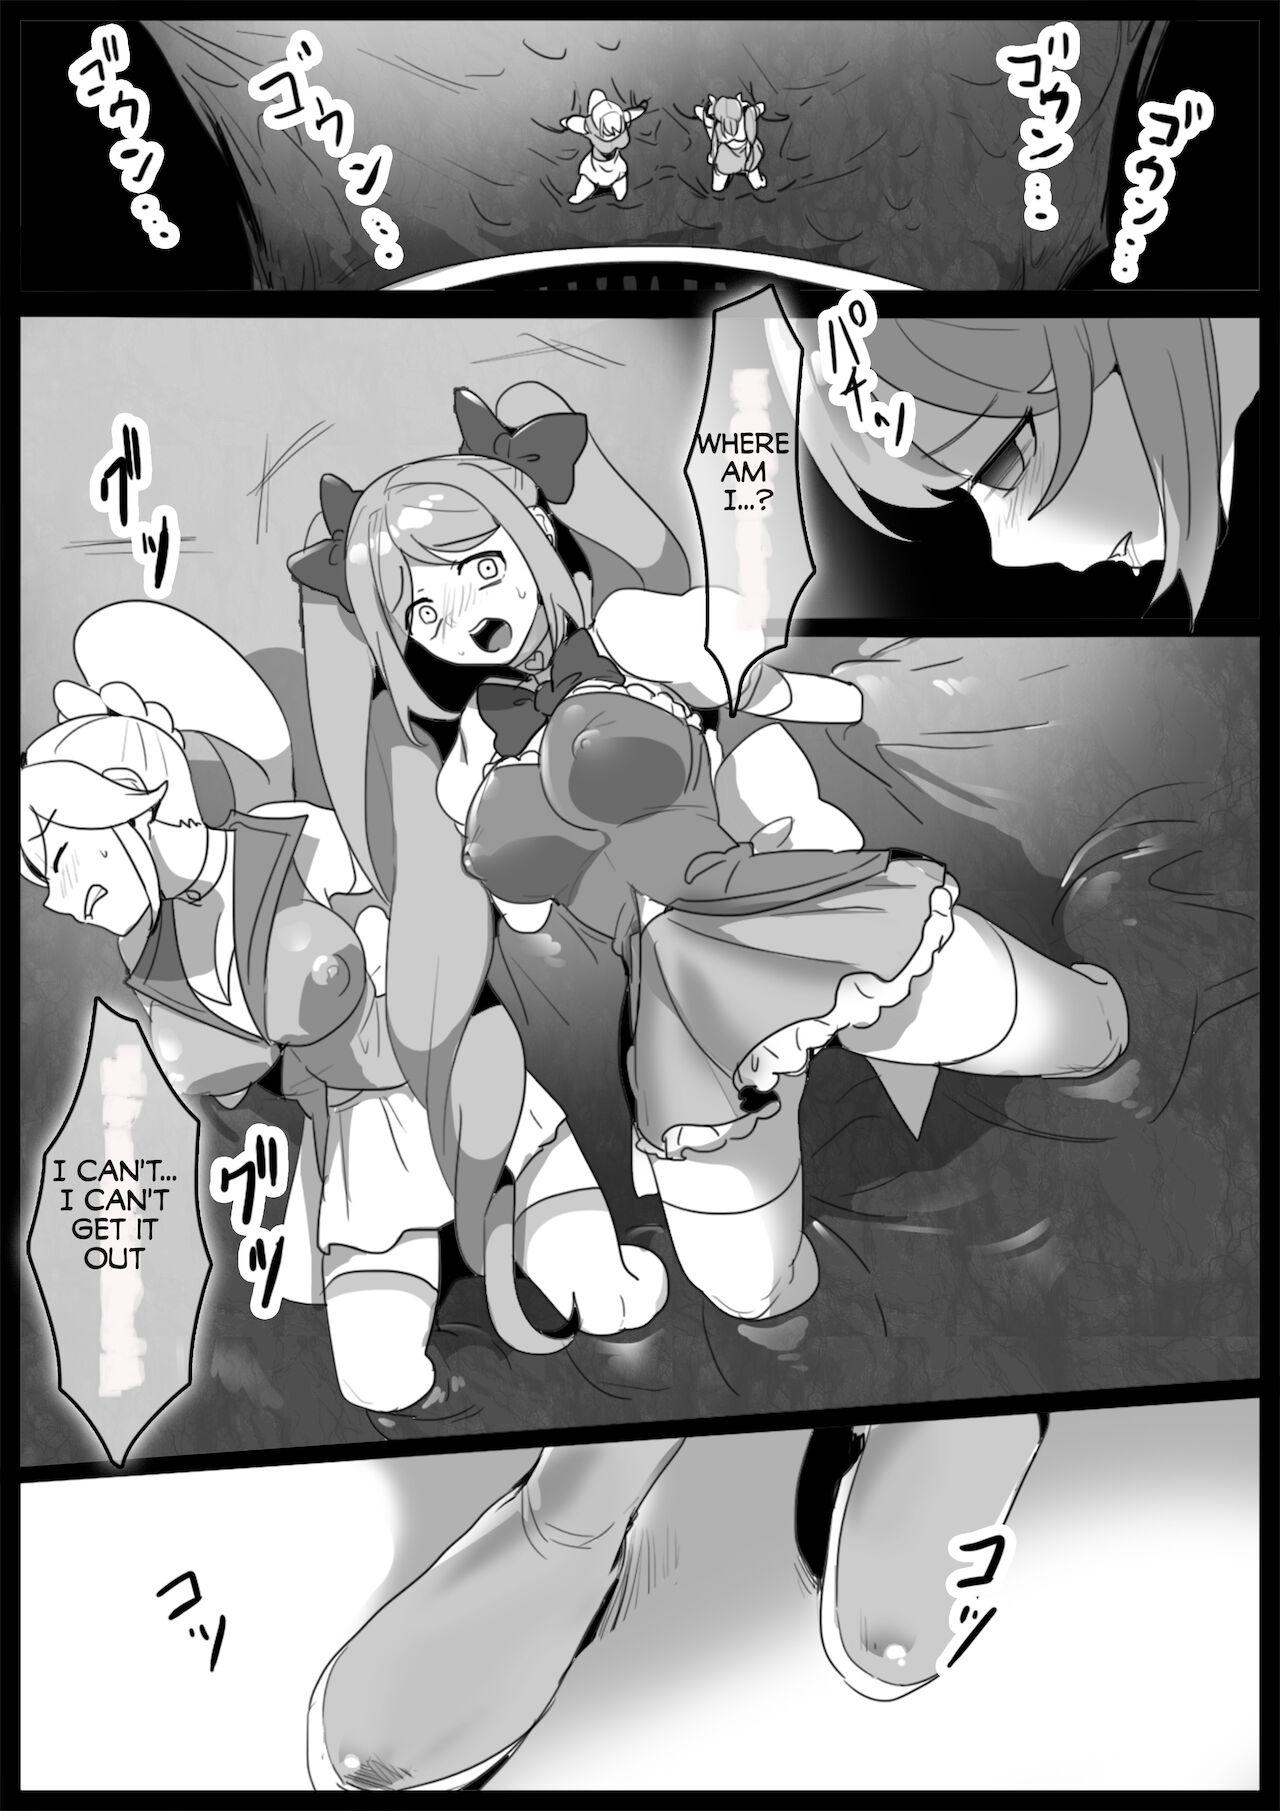 Infiel Magical Girl Seedbedded and Corrupted in the Final Episode Gang - Page 2